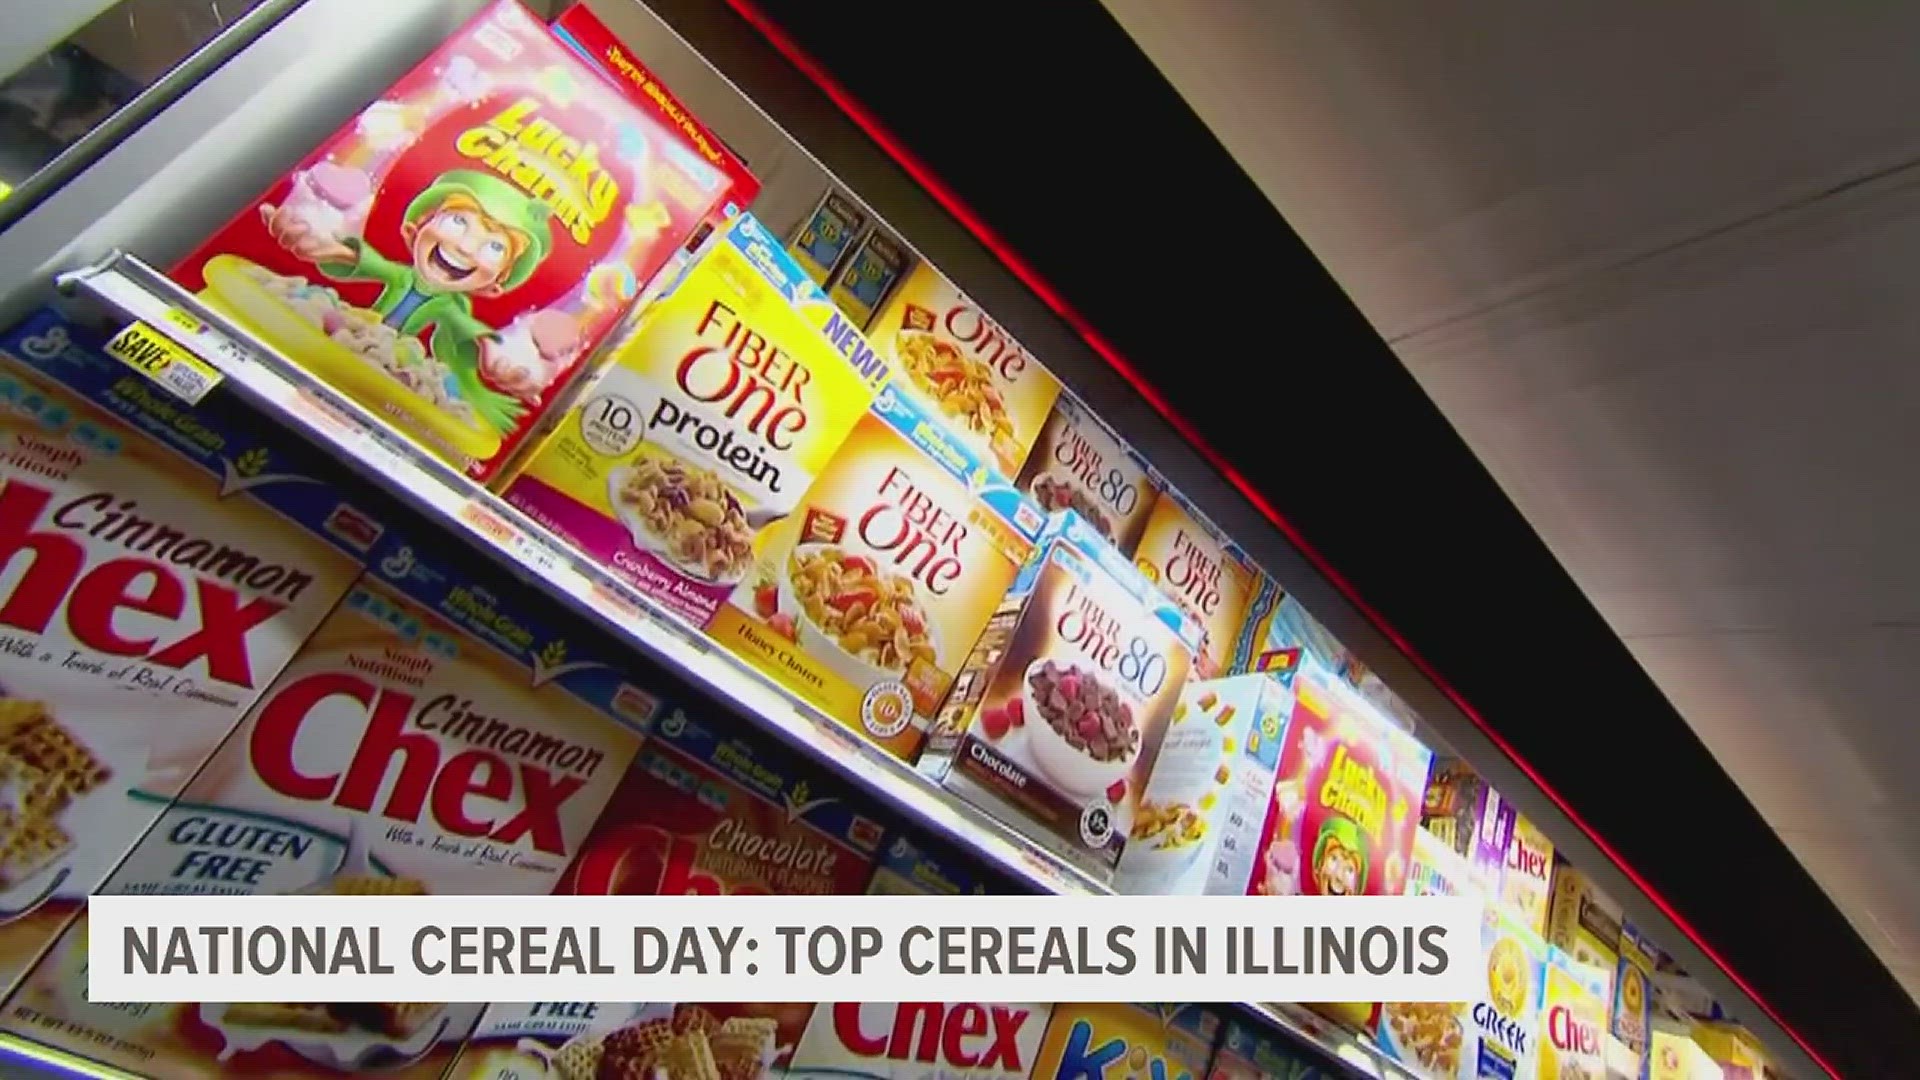 IllinoisBet.com looked at Google search results to find what 10 cereals Illinoians are most interested in.